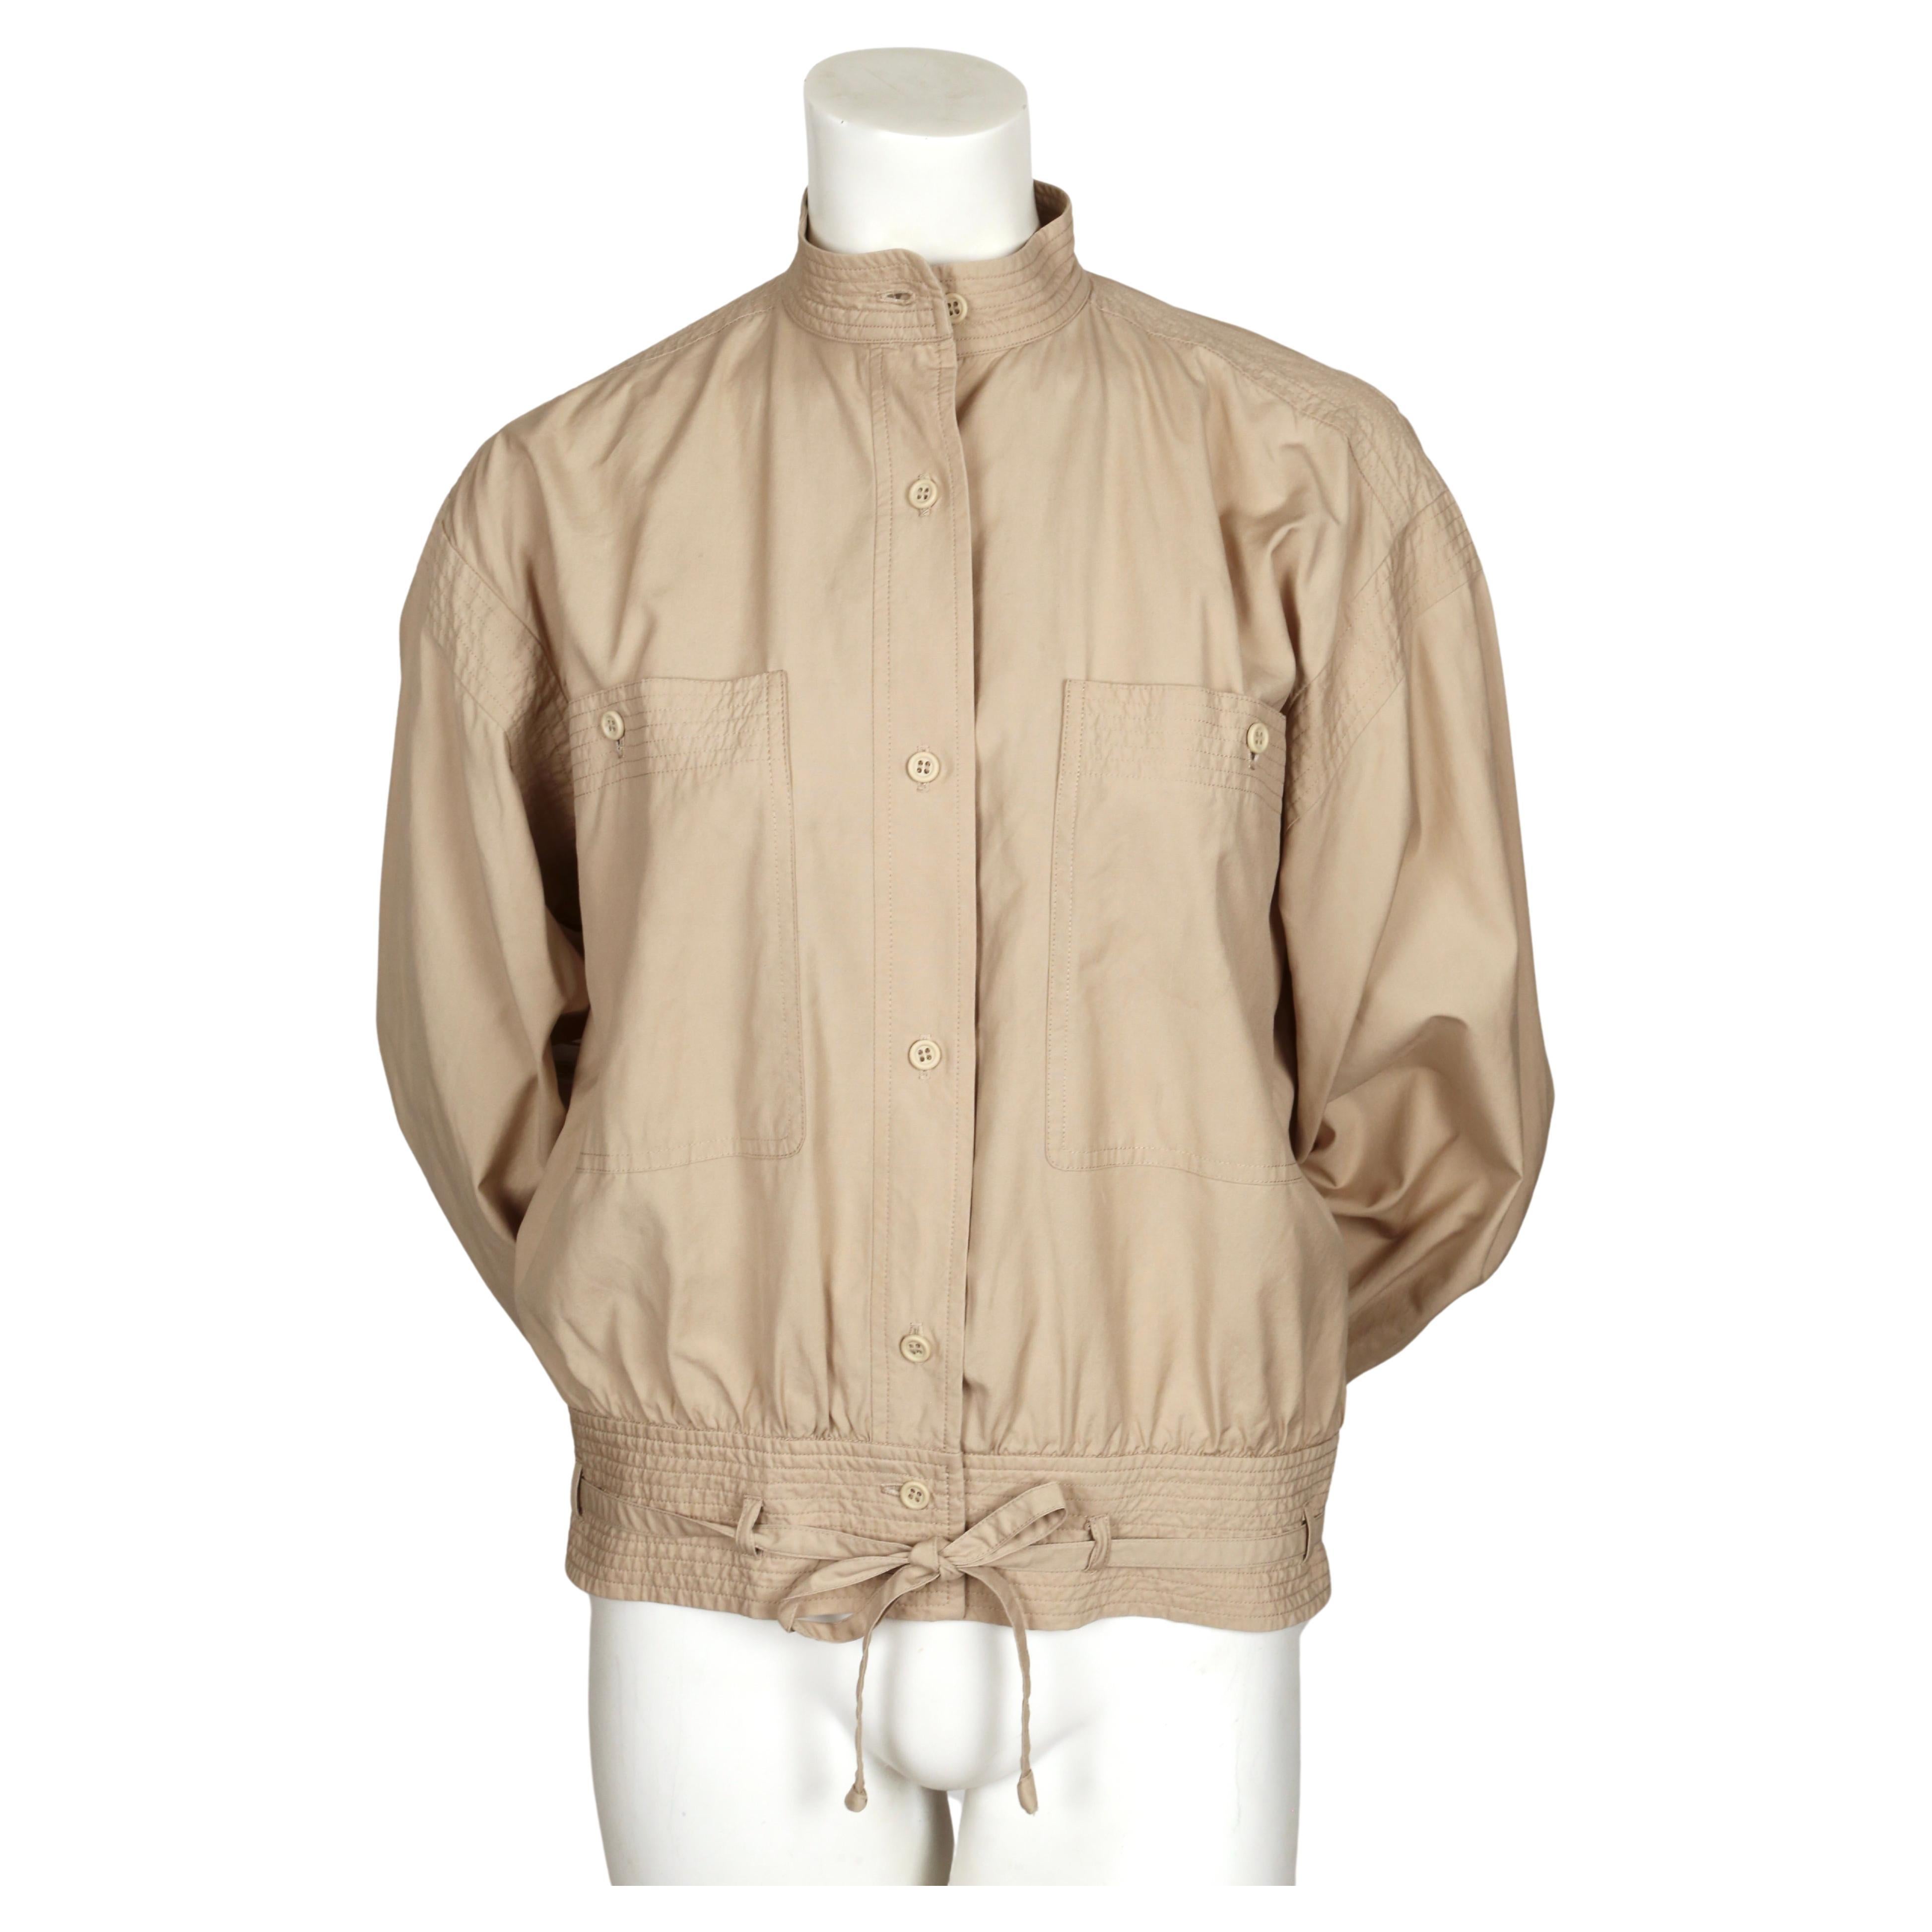 Tan, lighter-weight, cotton safari jacket with fitted band at hip and large chest pockets designed by Yves Saint Laurent rive gauche dating to 1978 exactly as seen on the spring runway. No size is indicated however this has an oversized fit and best